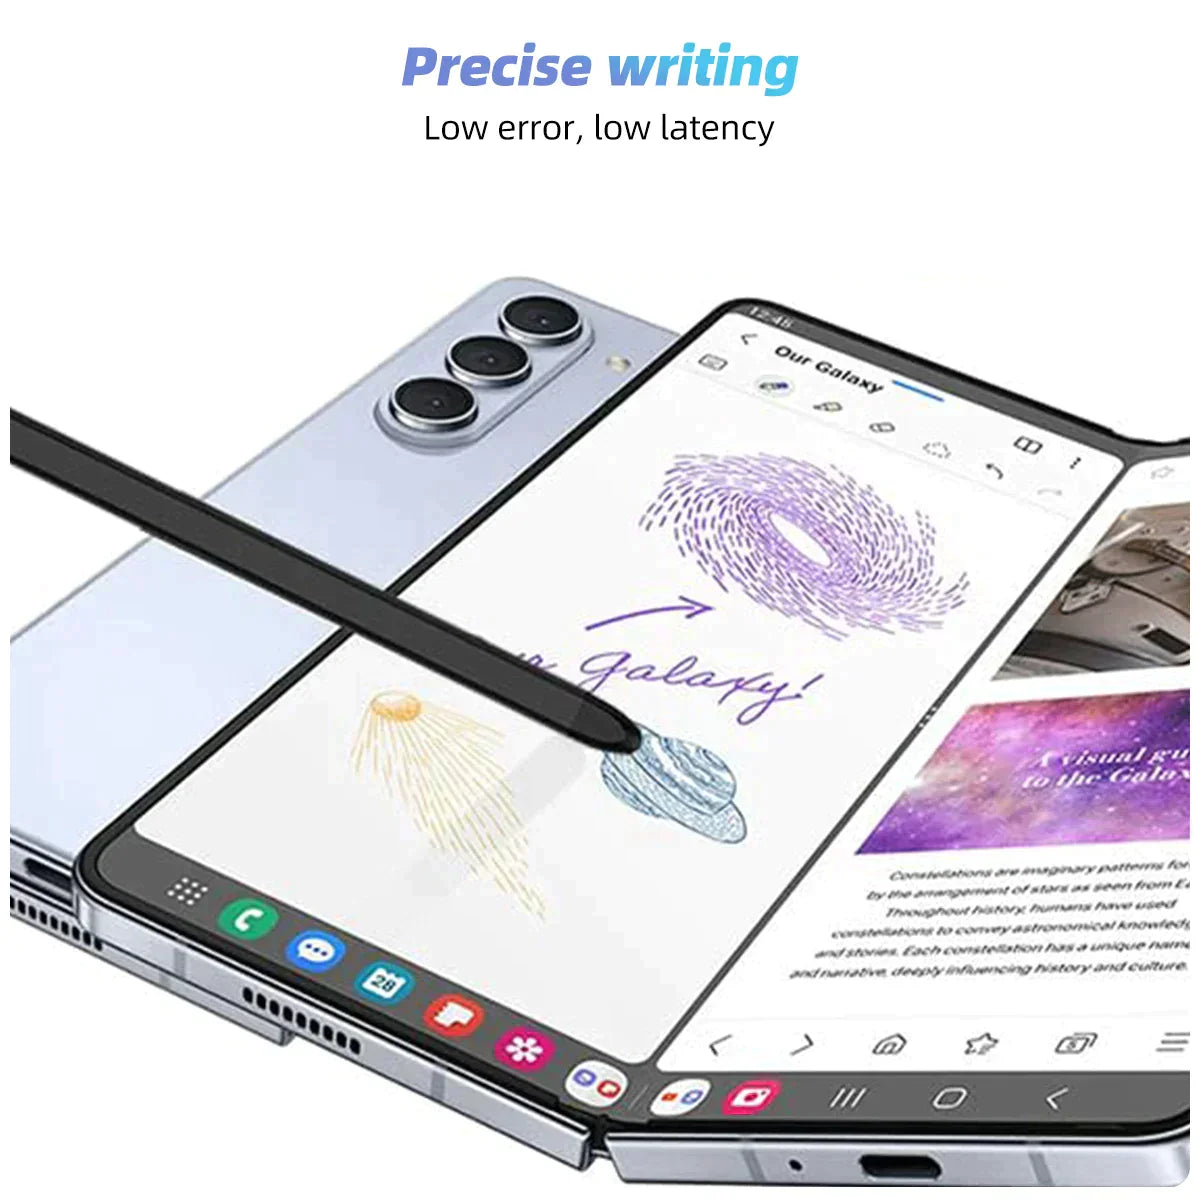 Aluminum Capacitance Pen Replacement Screen Stylus Touch Pen For Galaxy Z Fold Series